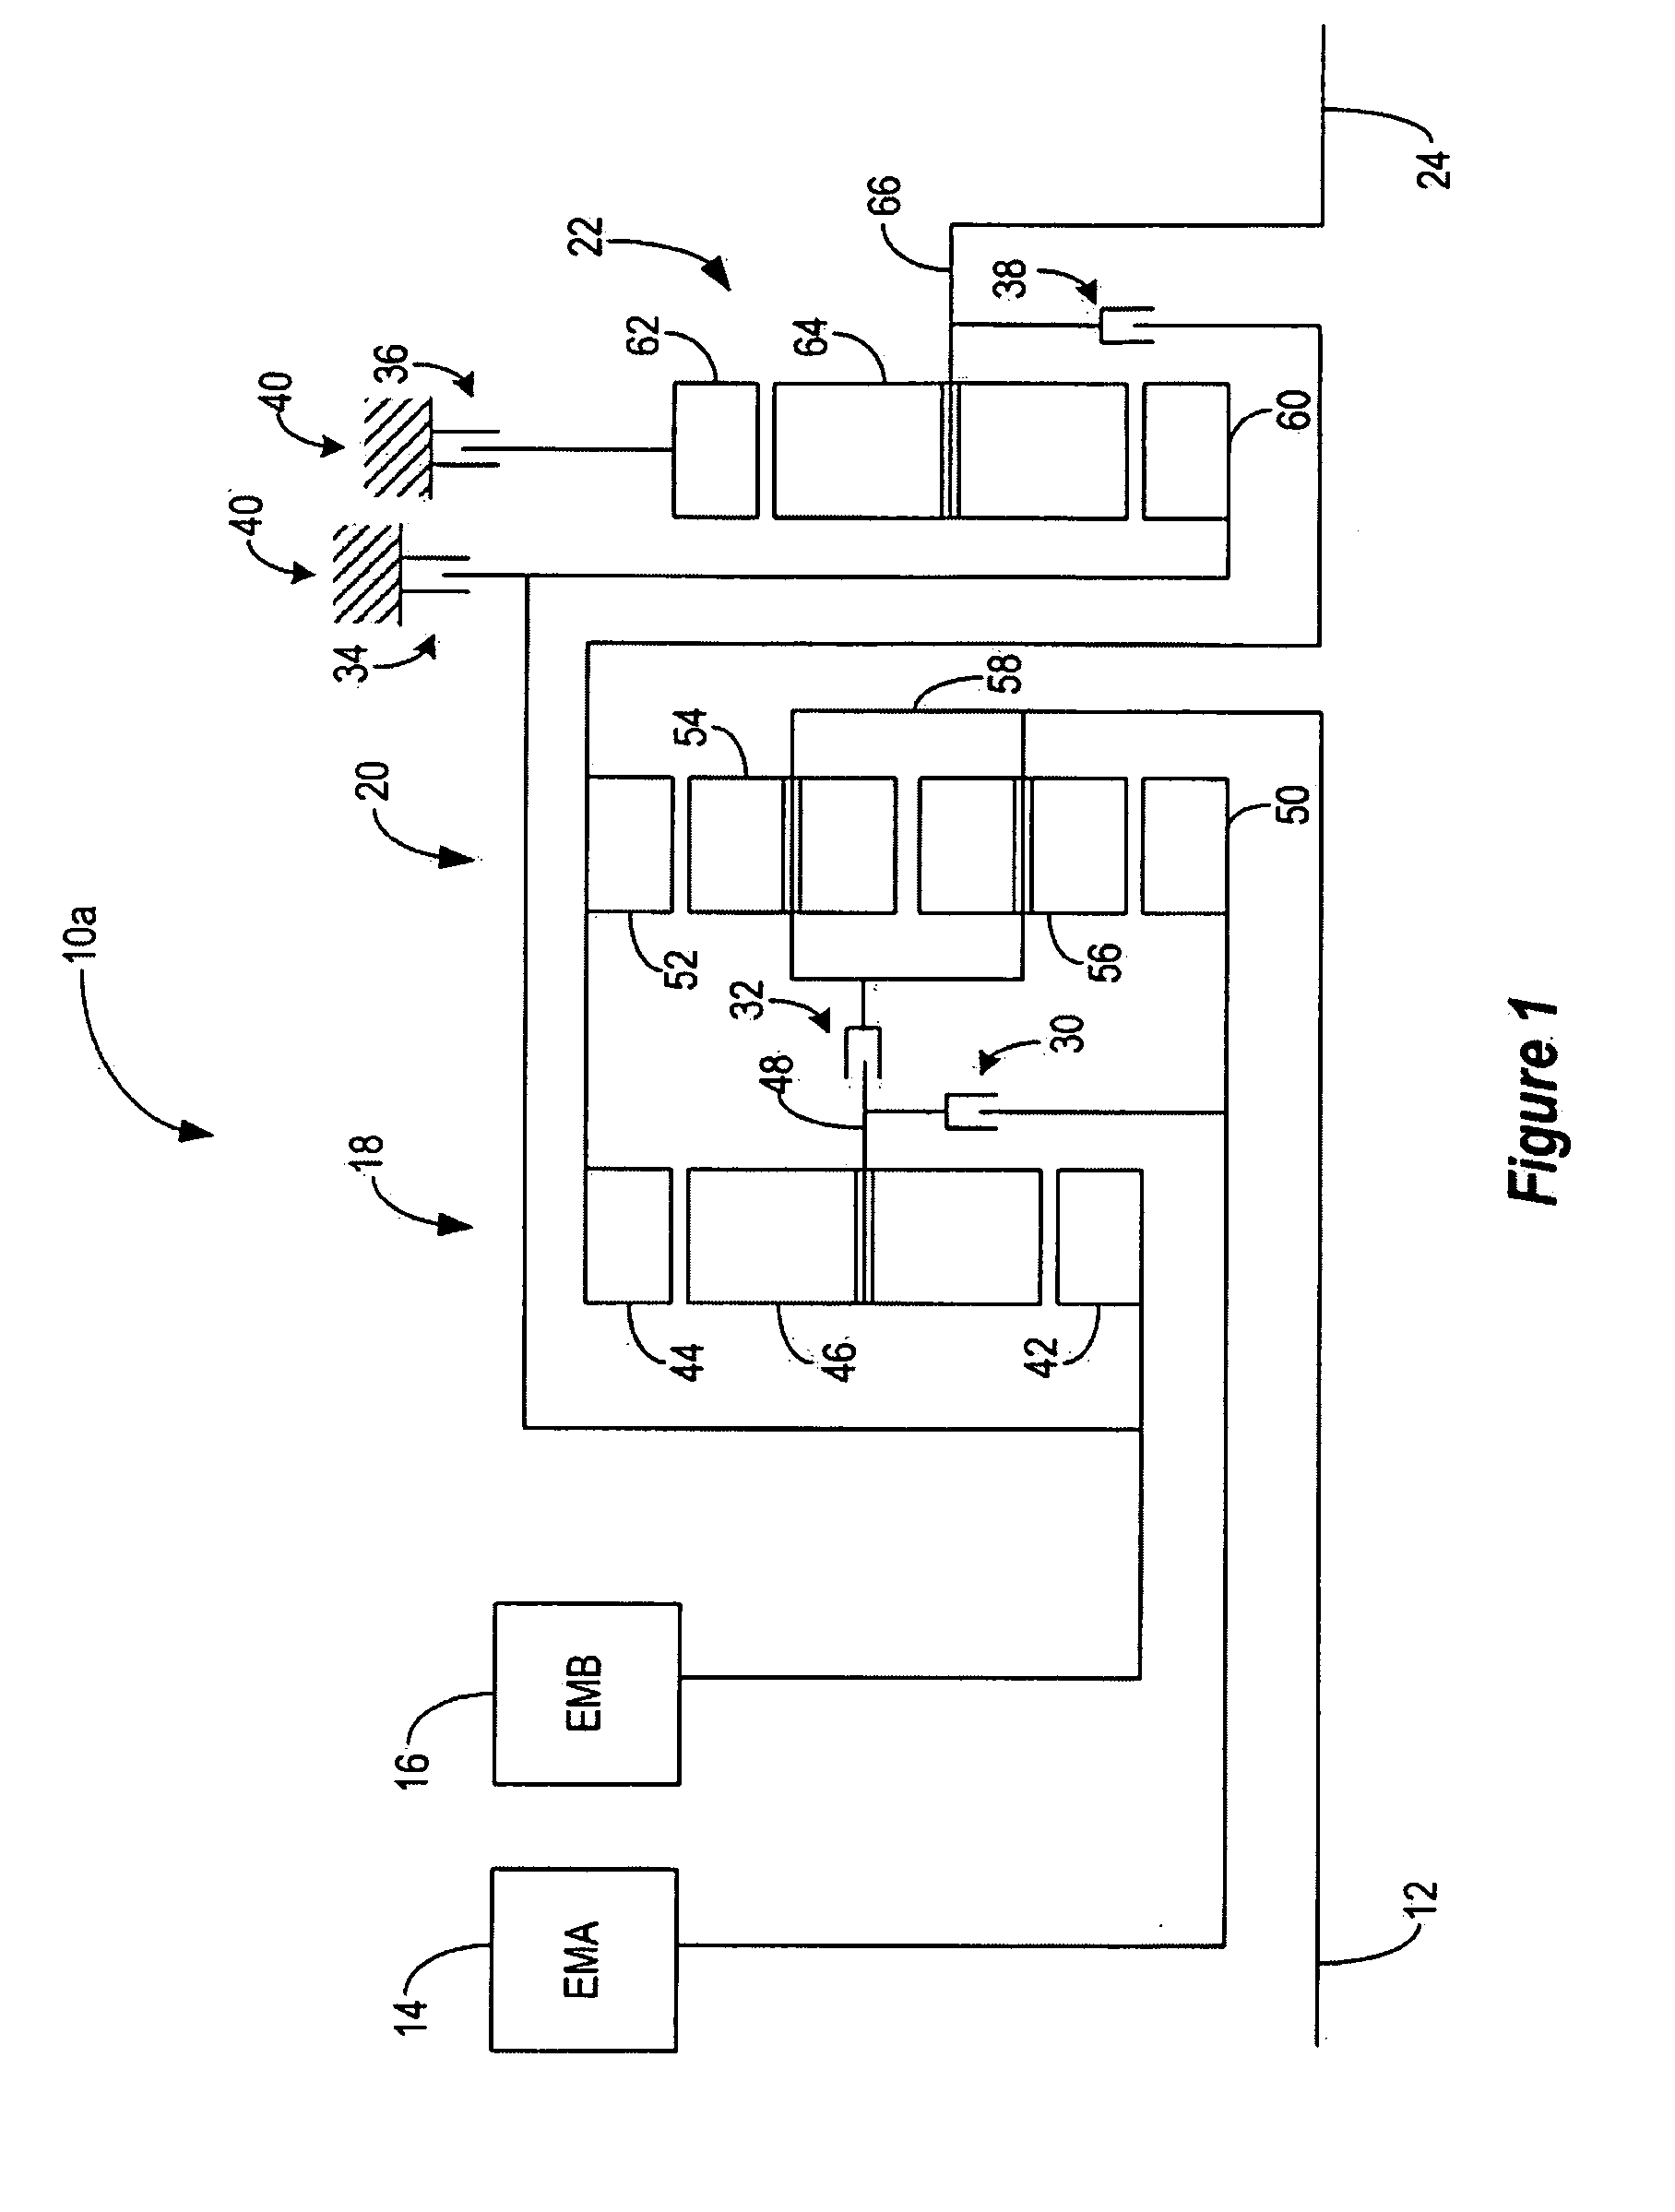 Electric variable transmission for hybrid electric vehicles with three forward modes, one reverse mode, and five fixed gears